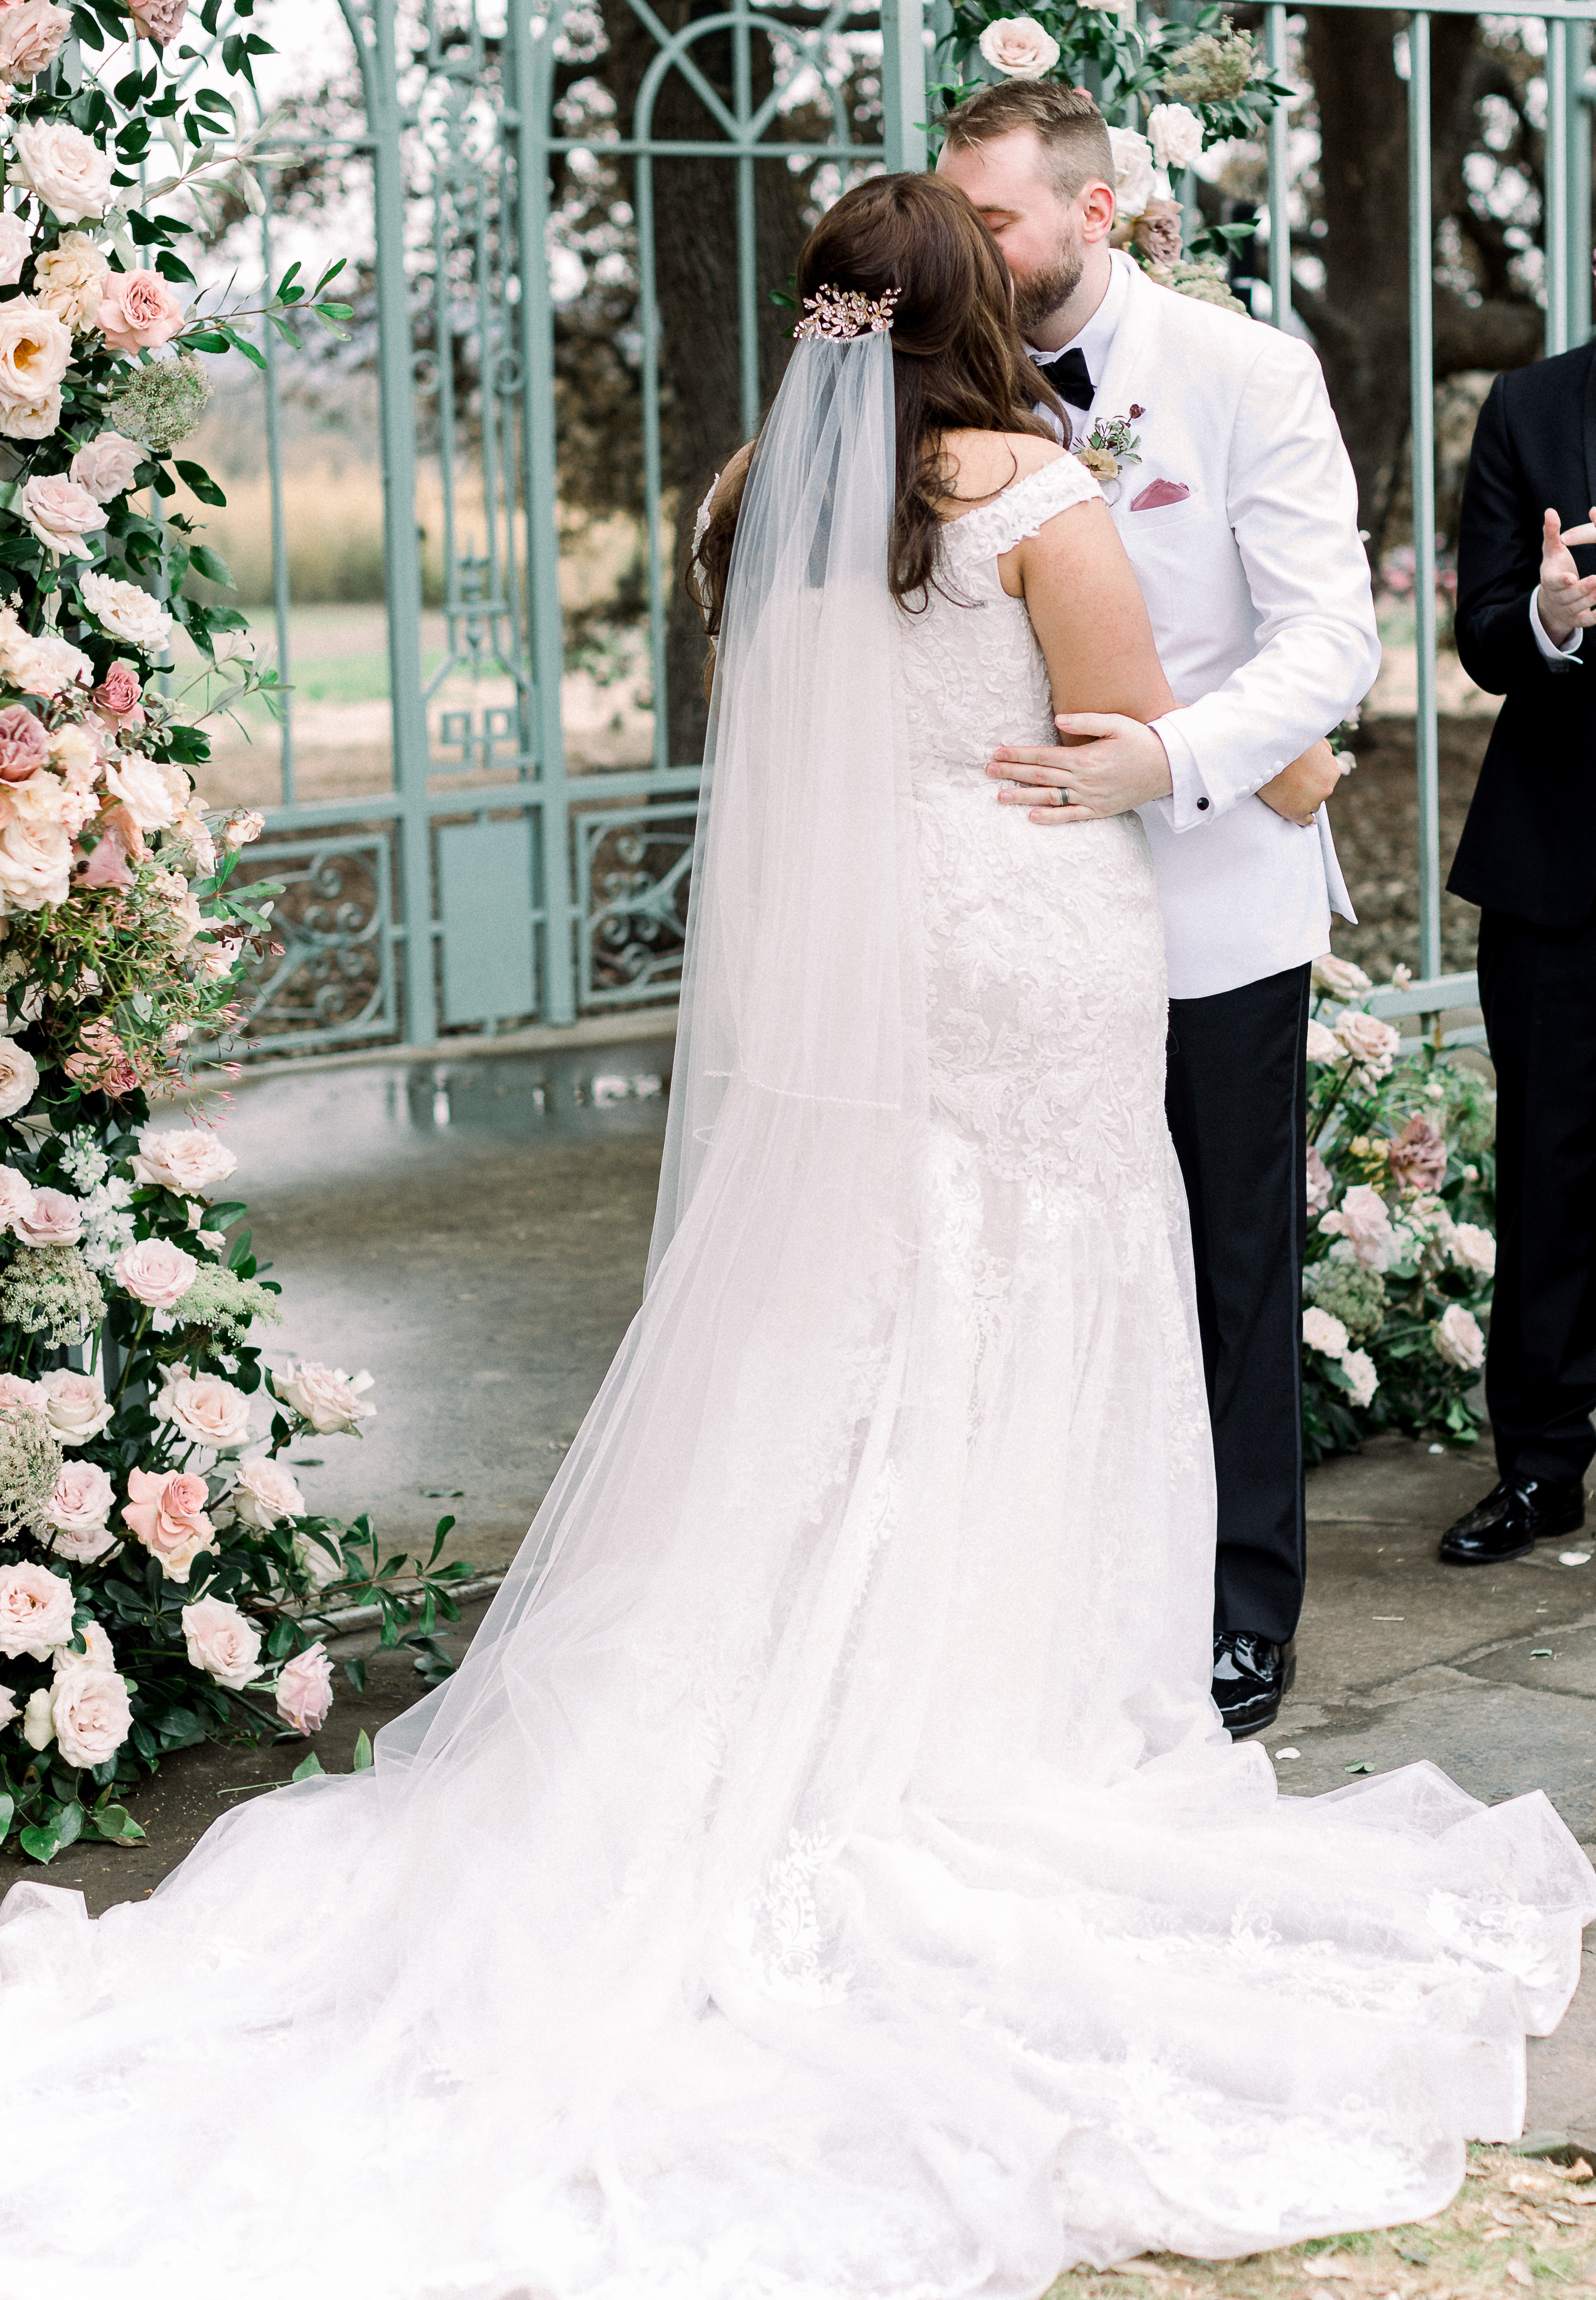 Bride, wearing long white veil and off the shoulder gown, and groom, in white tuxedo jacket and black pants,  kissing after an outdoor wedding ceremony at a hill country wedding venue. 